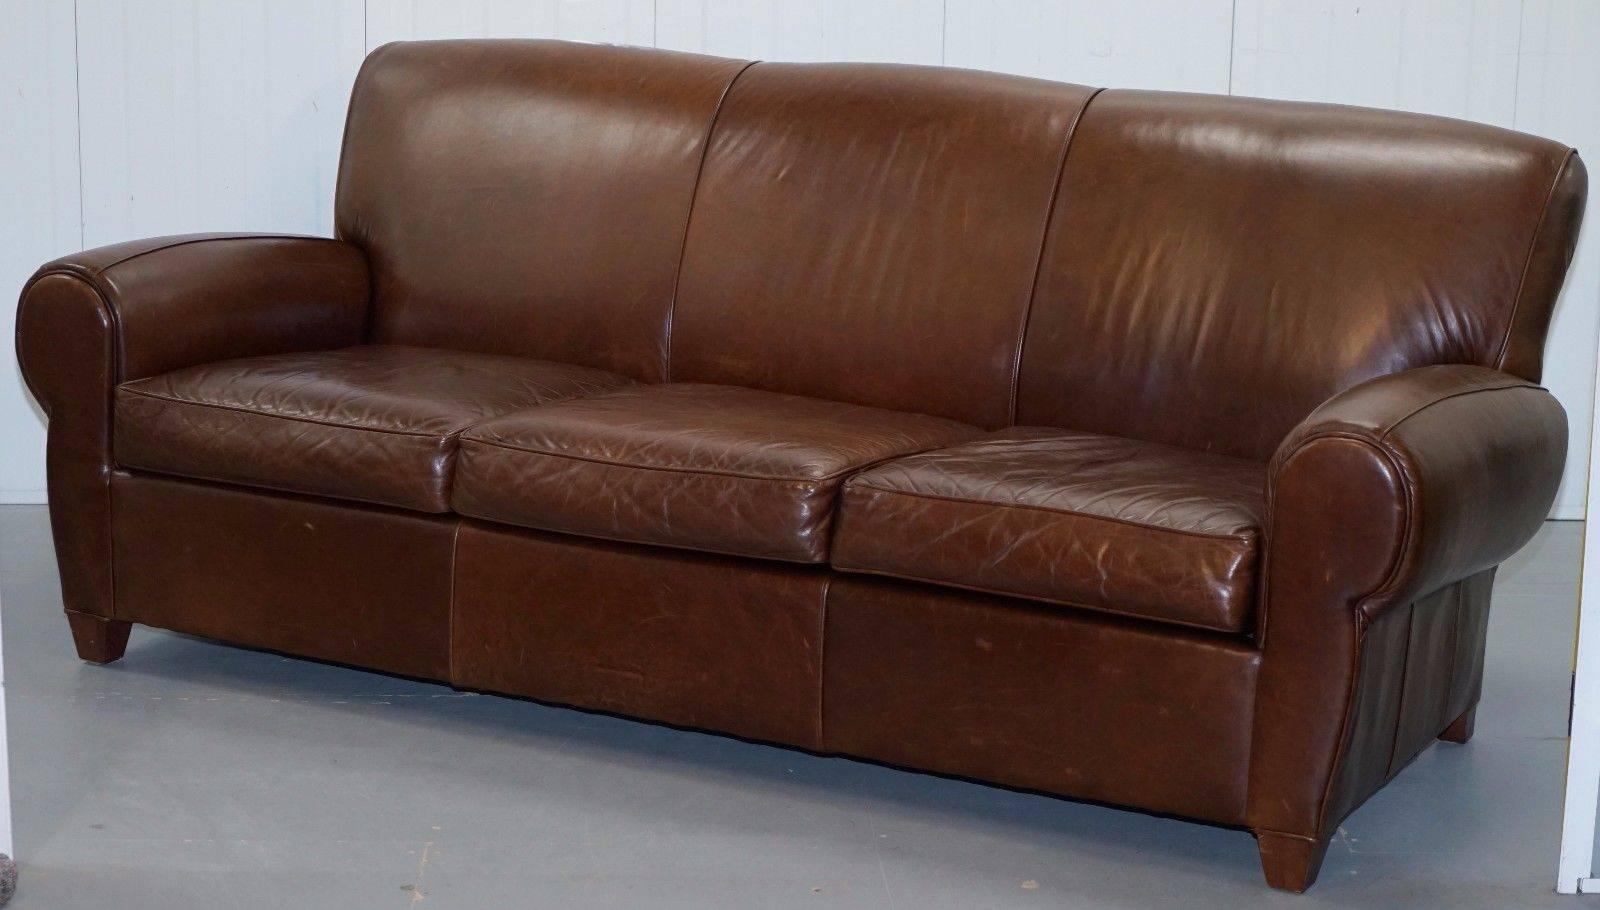 Modern Heritage Aged Brown Distressed Leather Four Seater Sofa and Ottoman